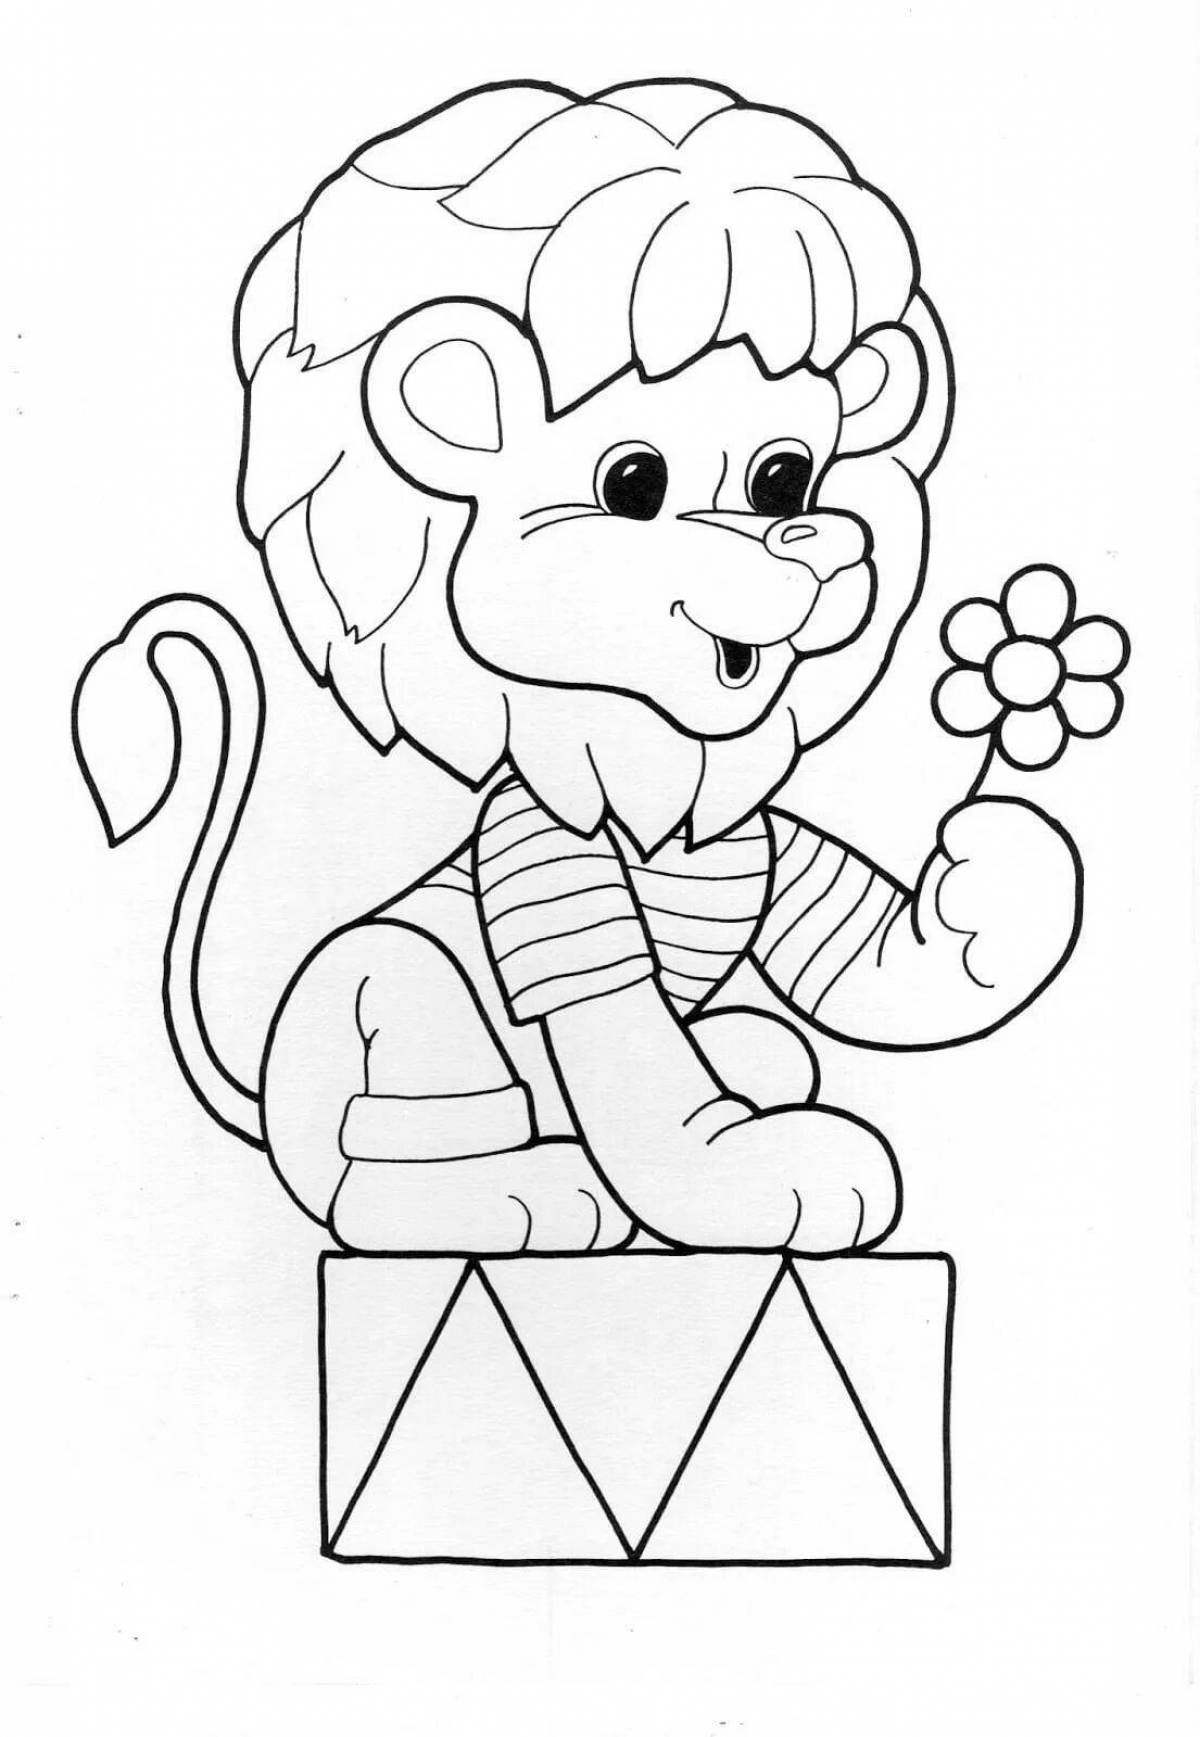 Fancy circus coloring book for kids